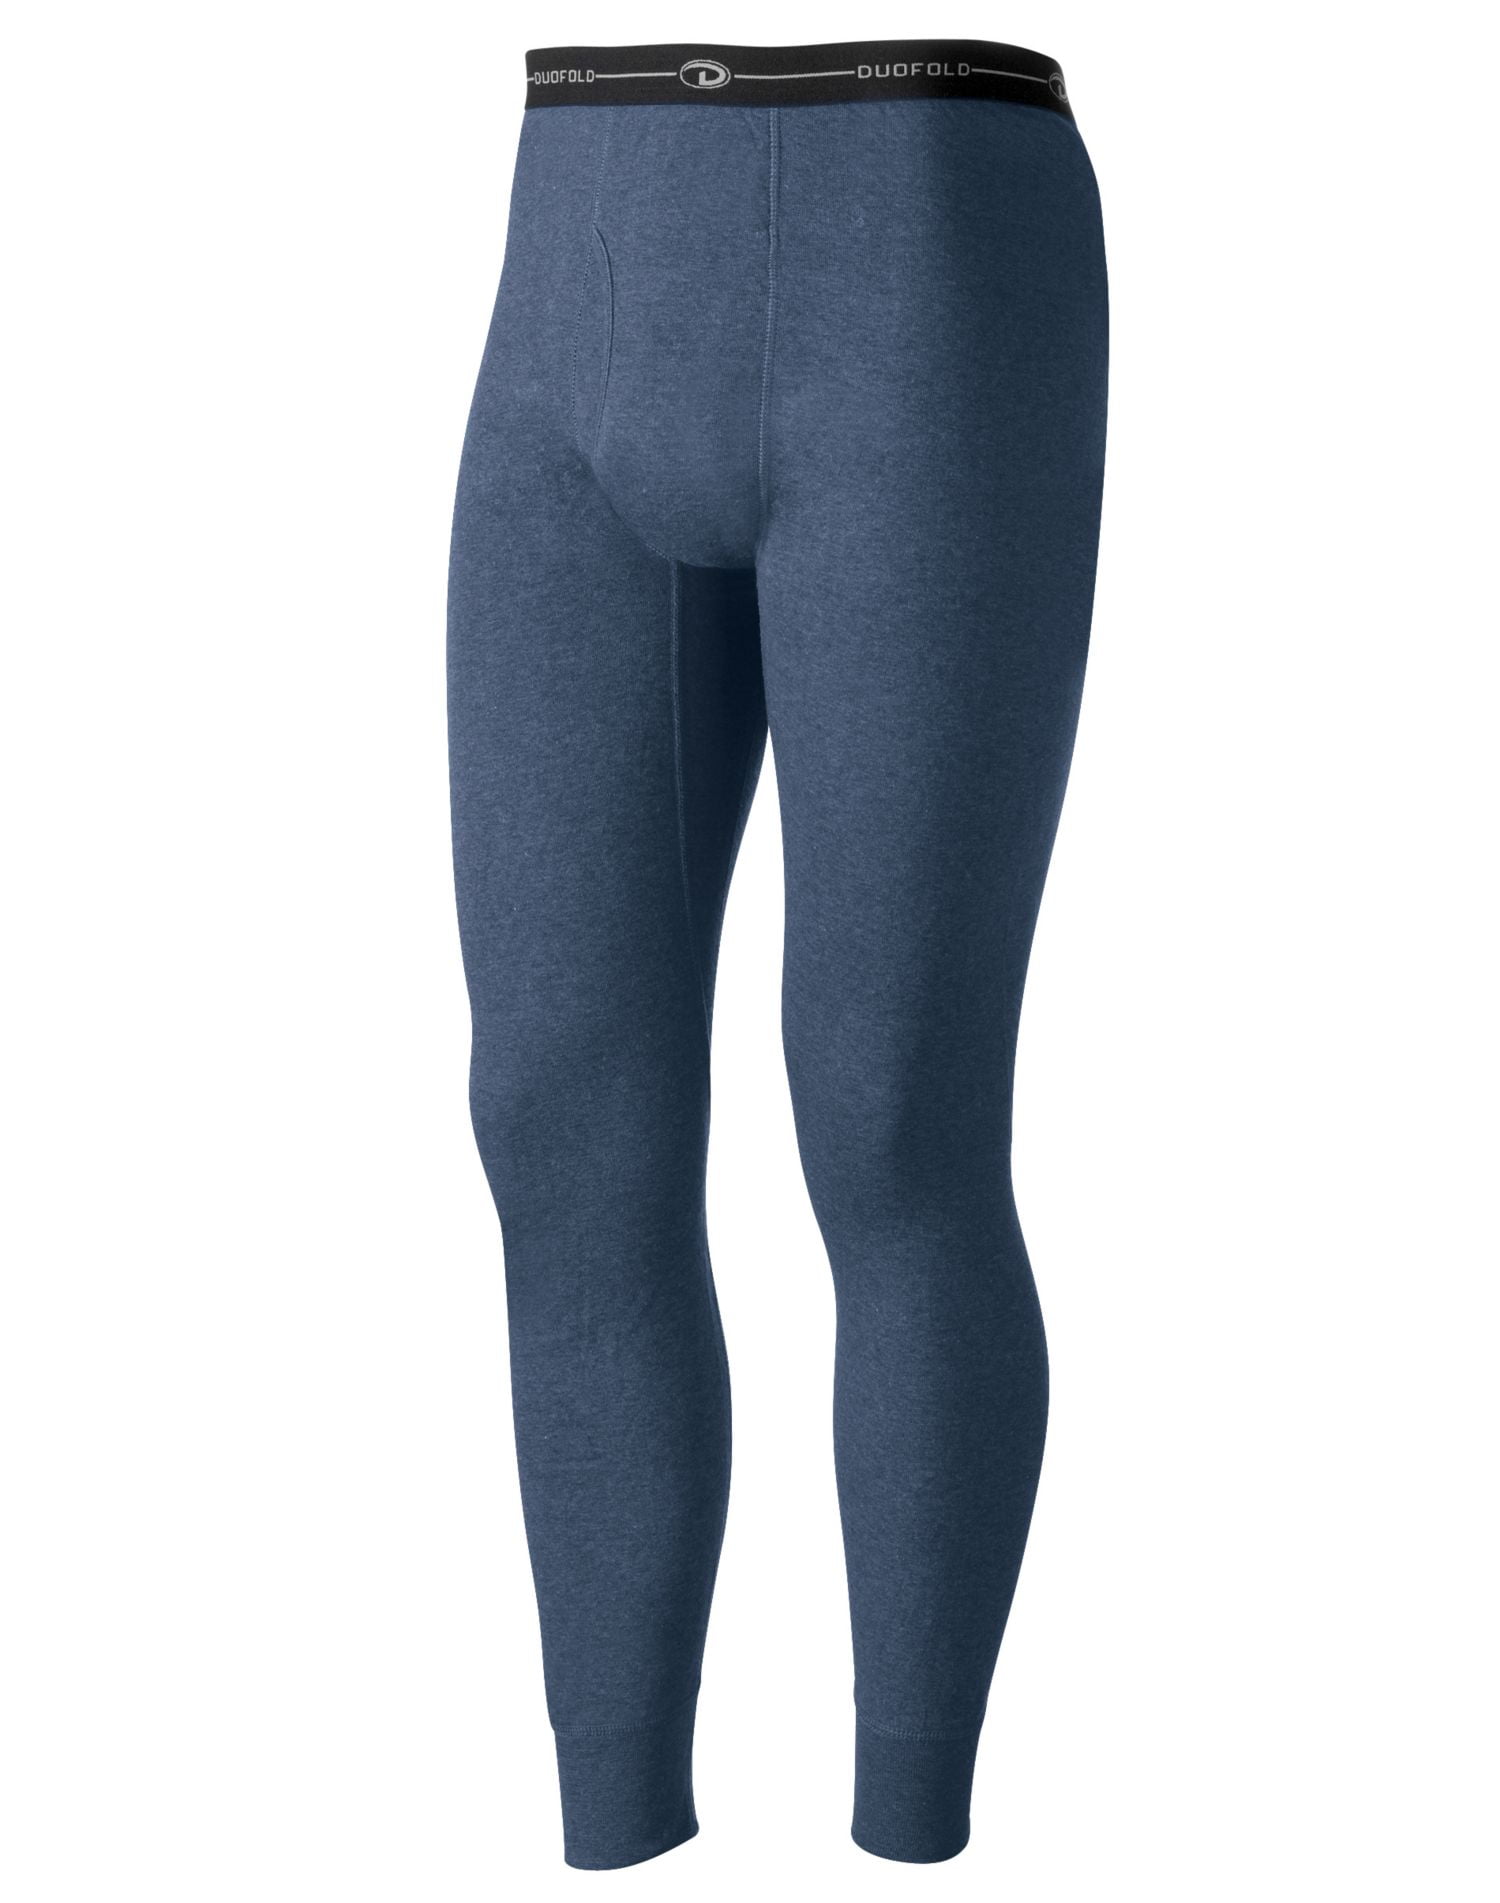 Duofold Thermal Underwear for Men for sale